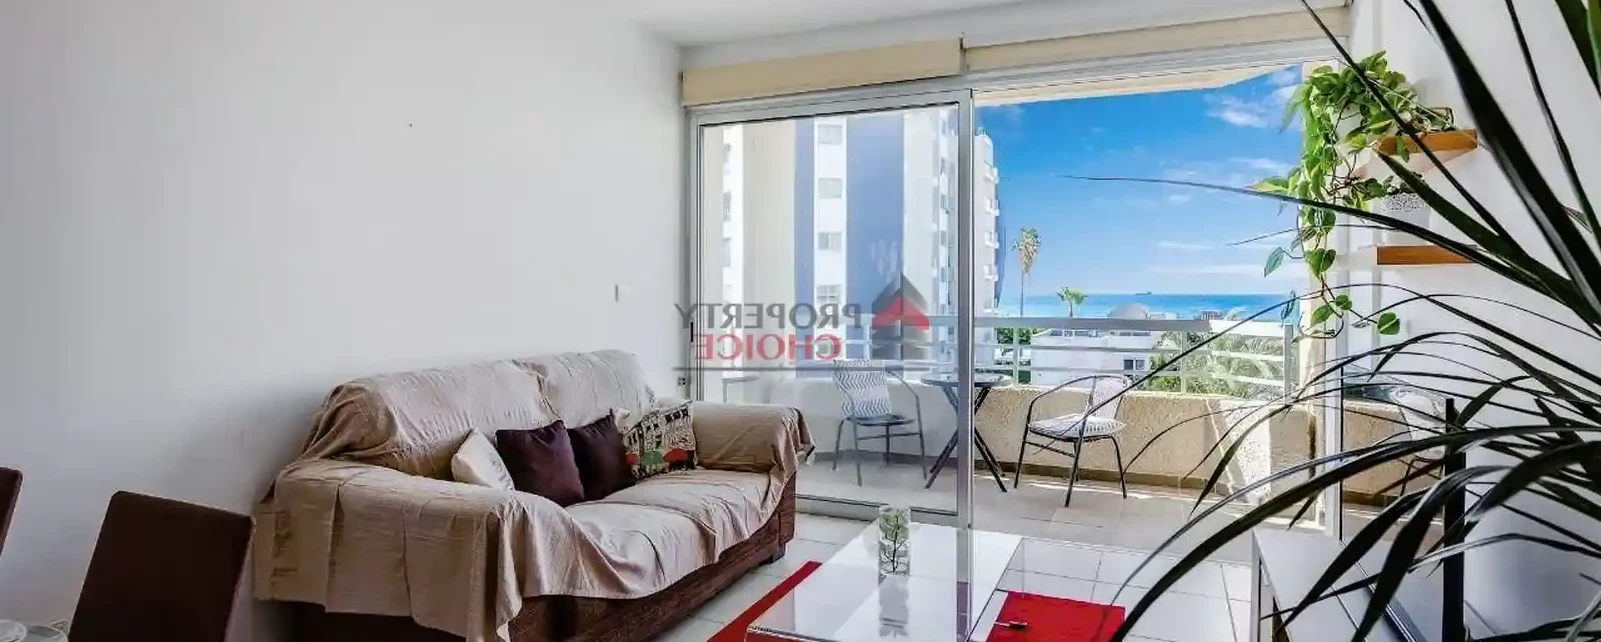 2-bedroom apartment fоr sаle €575.000, image 1